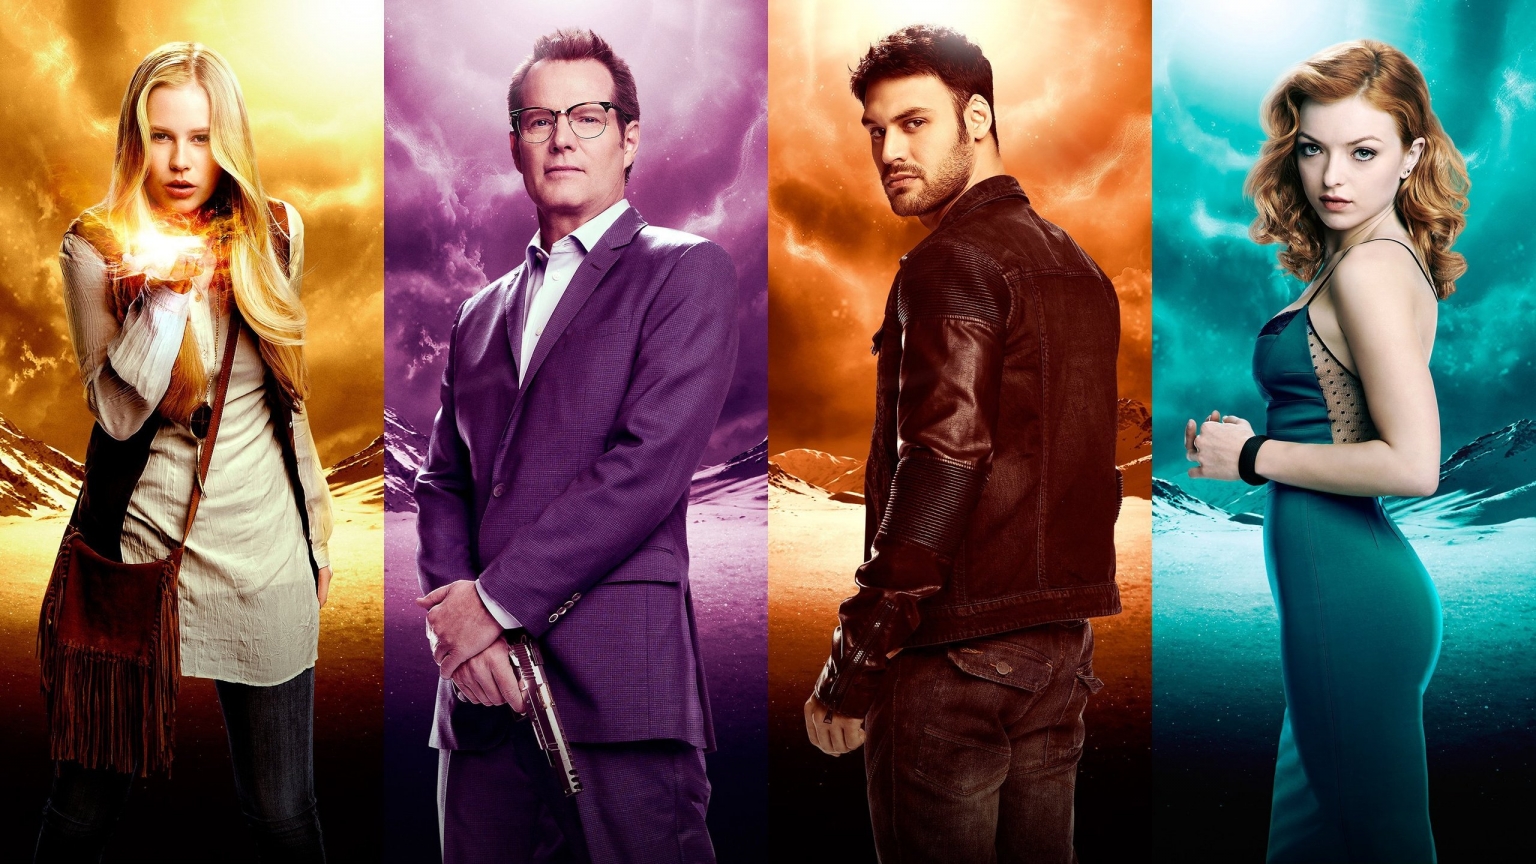 Heroes Reborn Cast for 1536 x 864 HDTV resolution